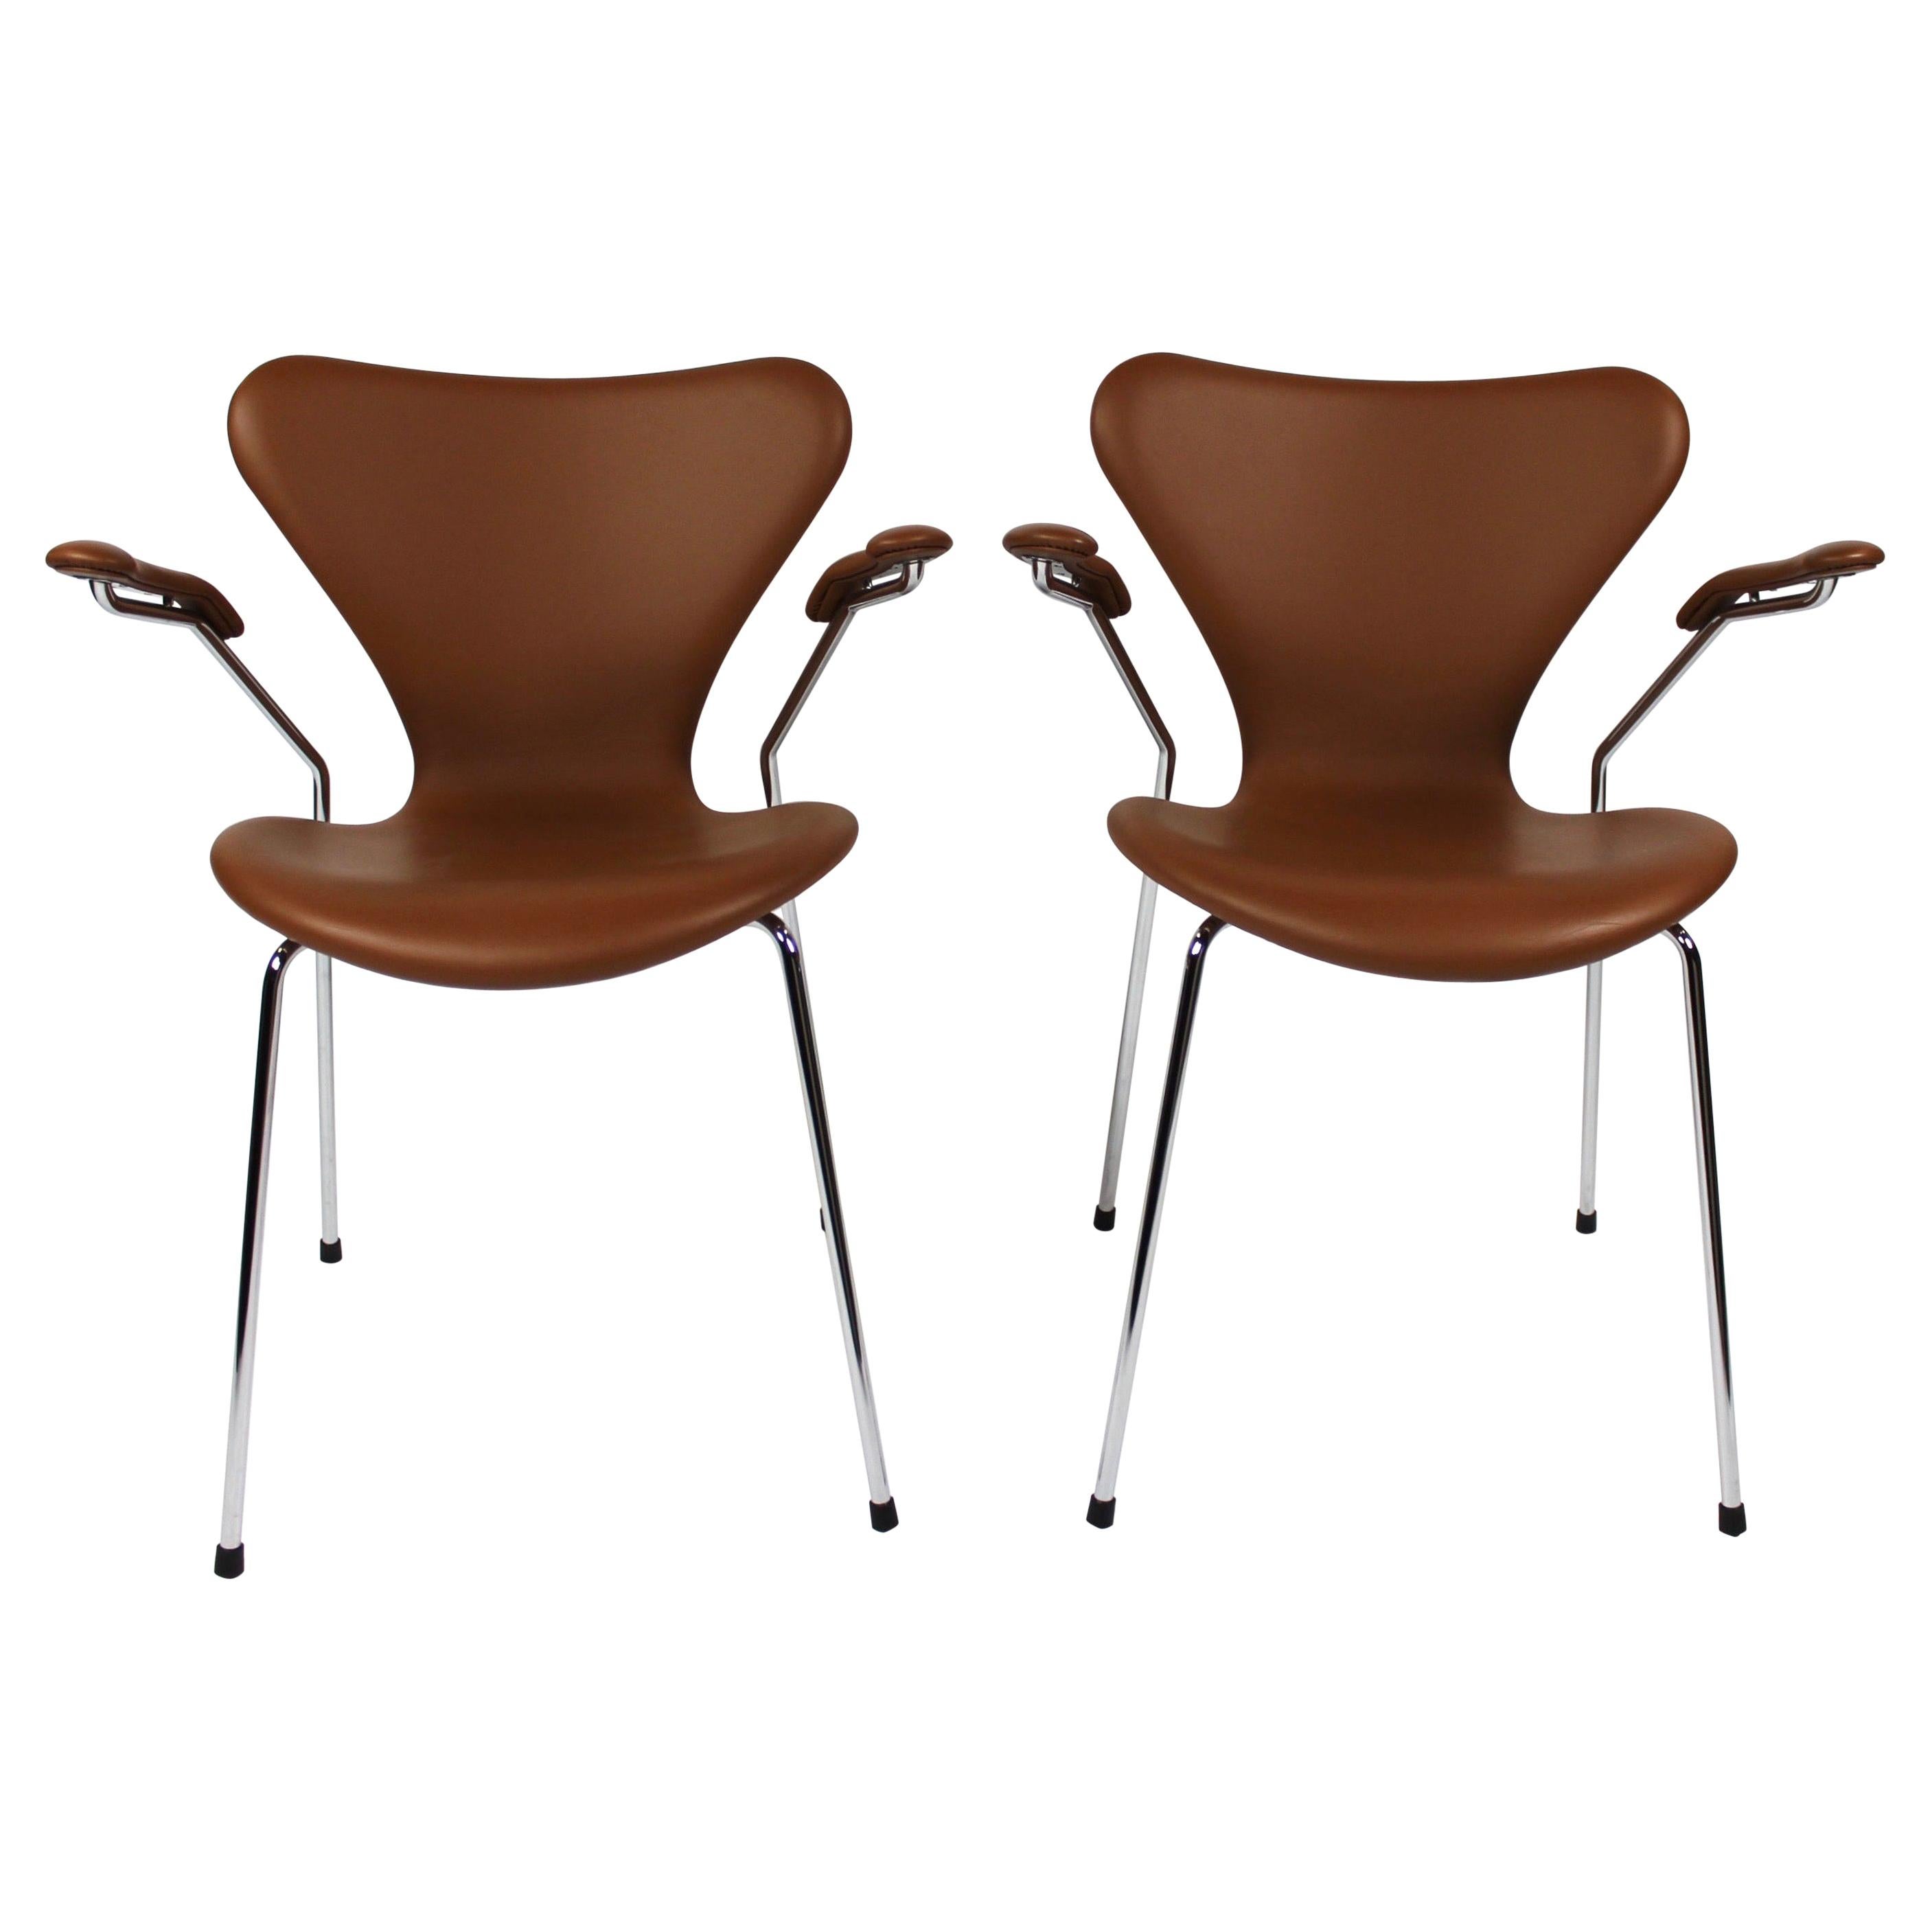 Set of Seven Chairs, Model 3207, with Armrests in Cognac Colored, 2019